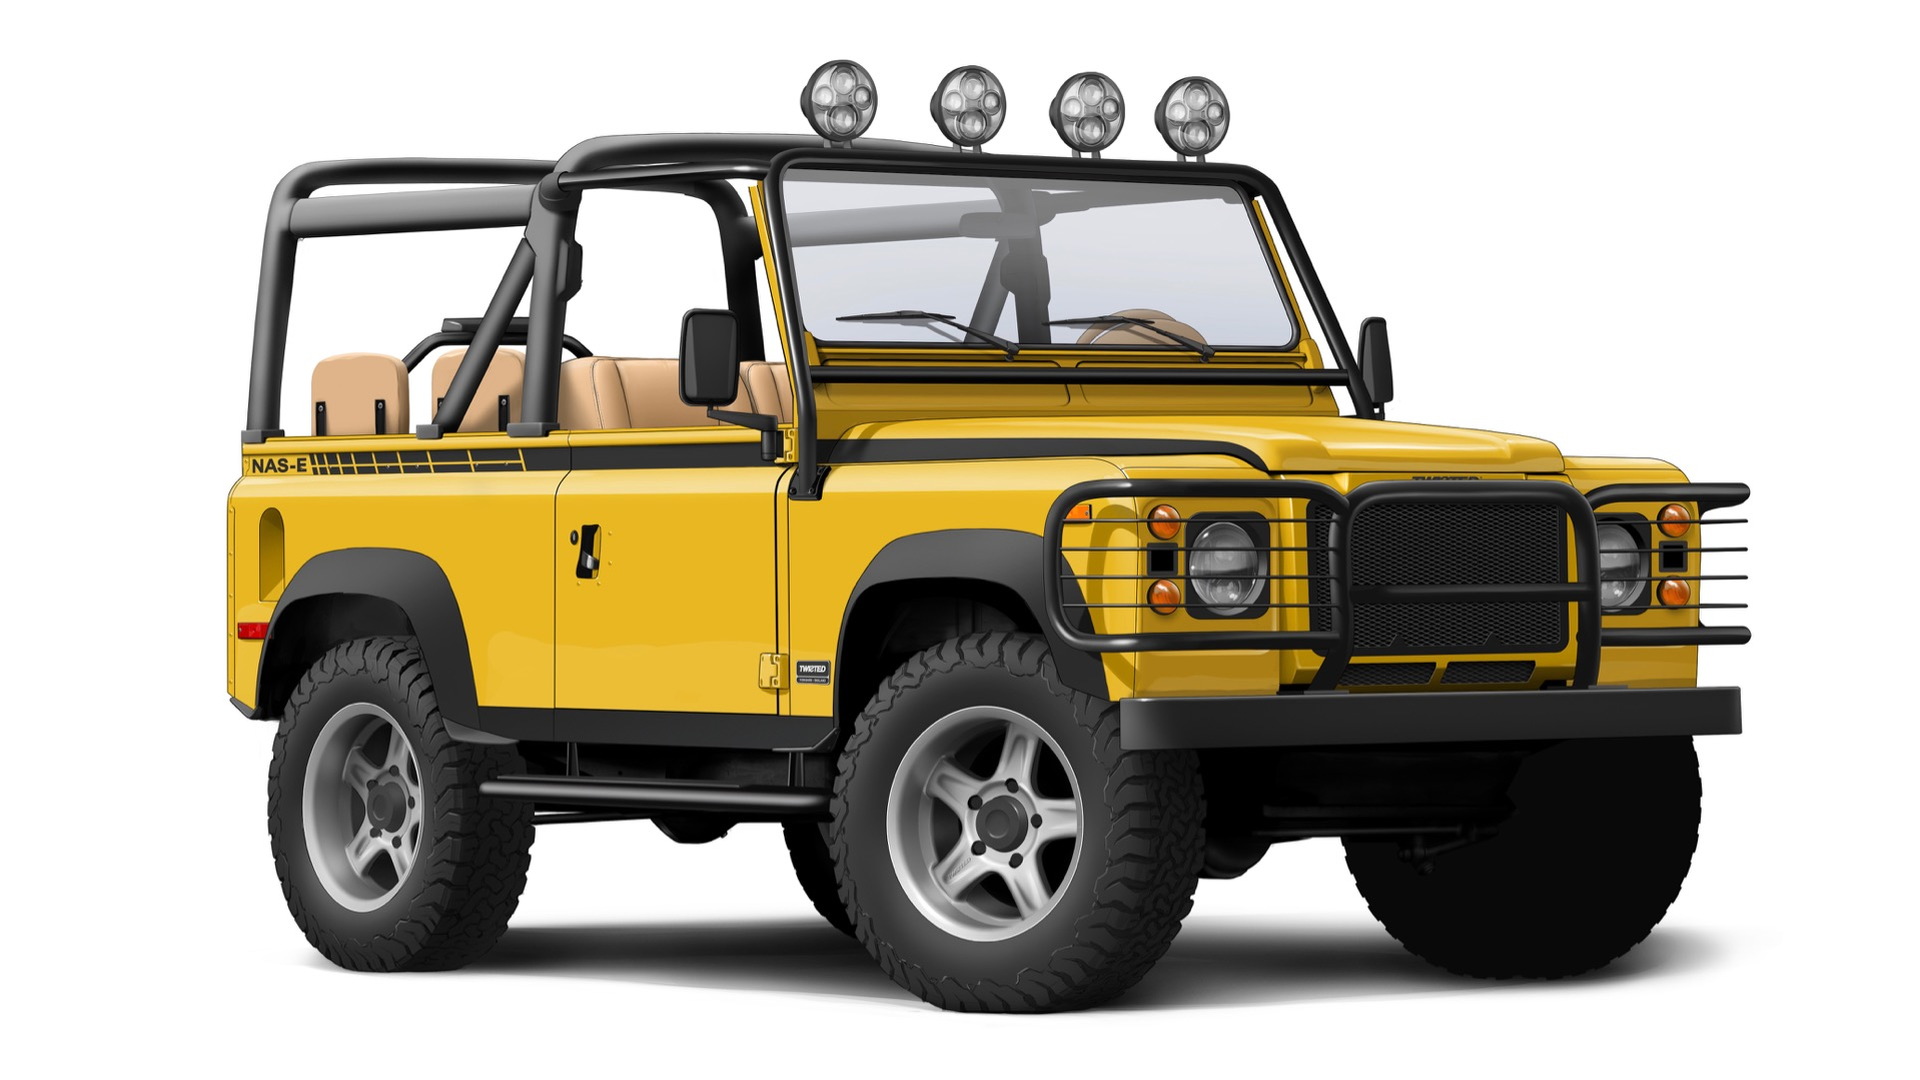 Twisted NAS-E electric Land Rover Defender